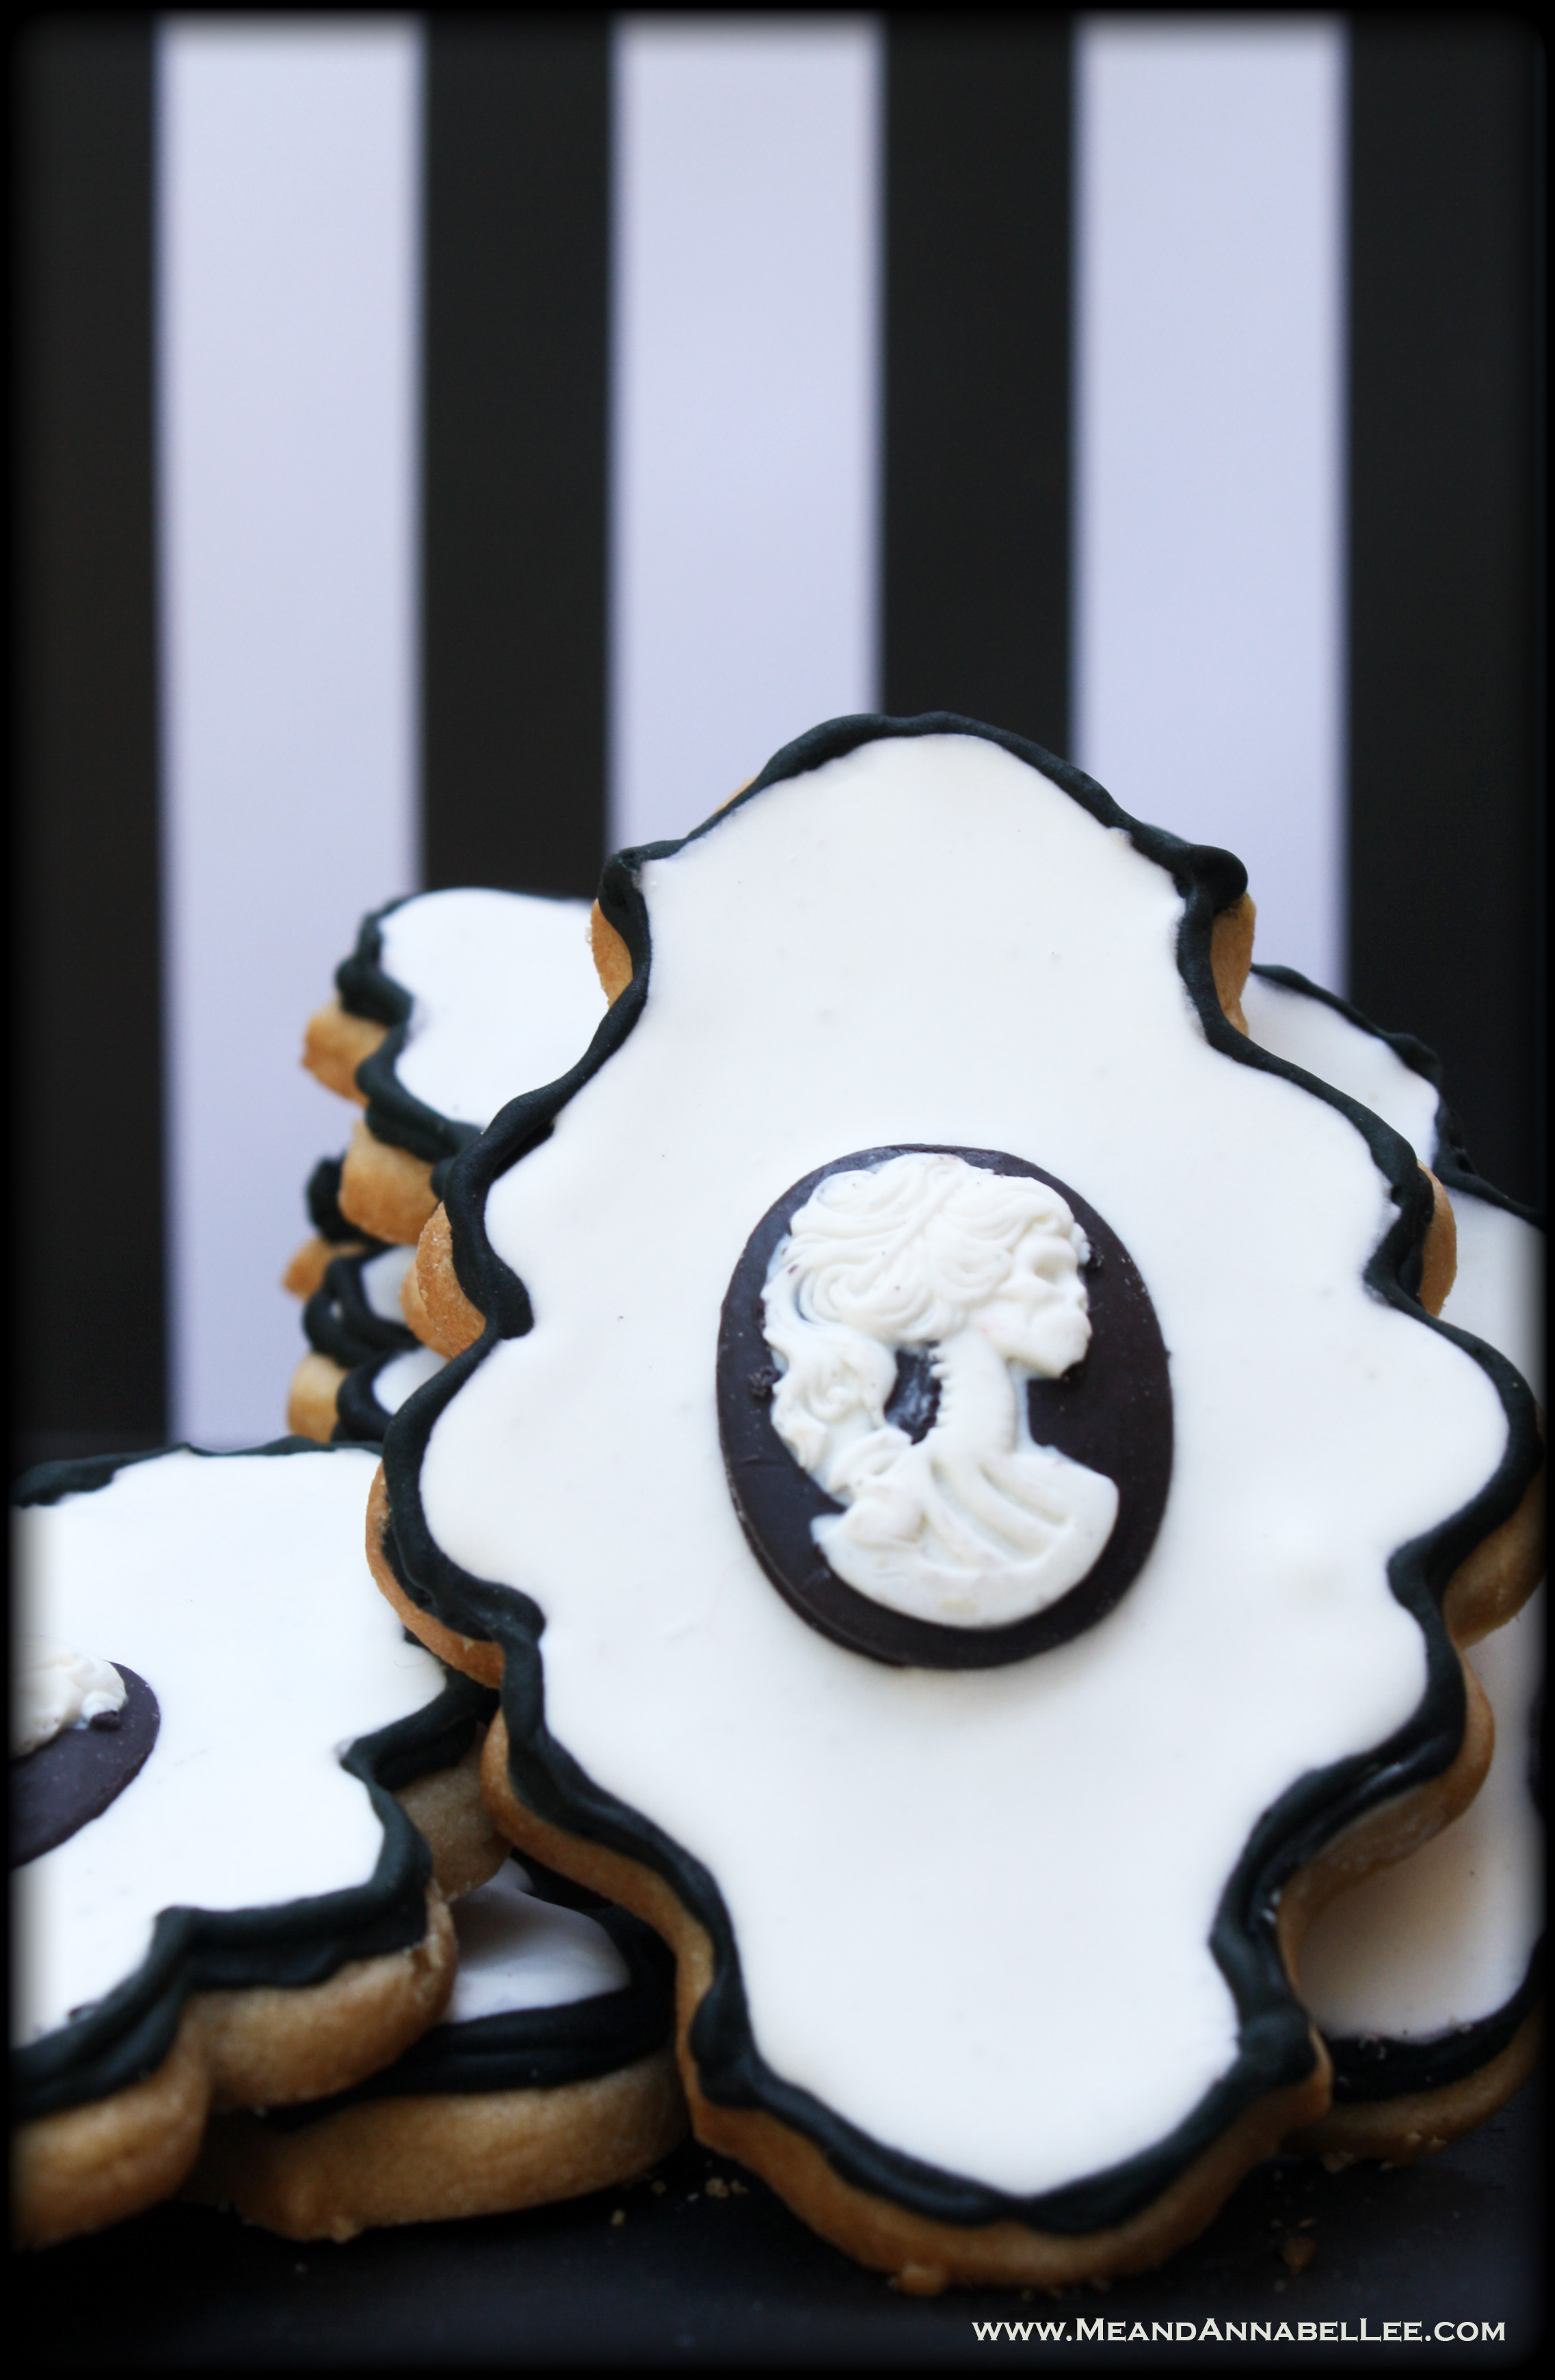 Victorian Gothic Skeleton Cameo Cookies | Black & White | Almond Vanilla Sugar Cookies | Chocolate Cameo | Royal Icing | Gothic Baking | www.MeandAnnabelLee.com